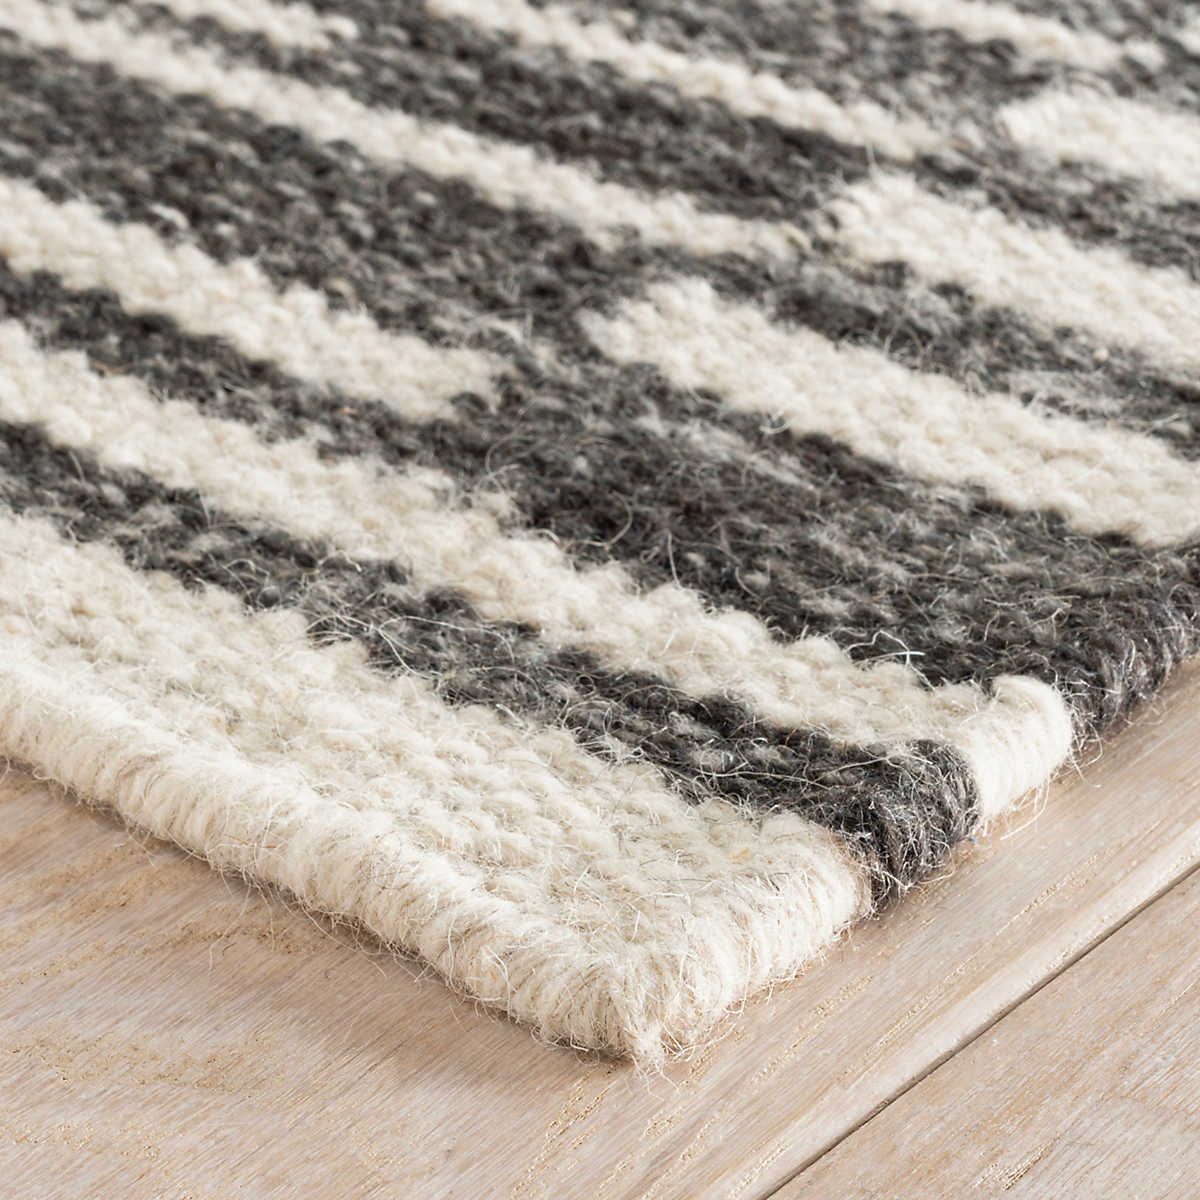 The Heights Charcoal Rug creates the illusion of layers with this gorgeous chunky, flatwoven wool rug. Concentric rectangles of offset ladder stripes make a bold graphic statement. Hand-loomed by artisans from undyed natural fleece wool in marled shades of Charcoal and Ivory. Amethyst Home provides interior design services, furniture, rugs, and lighting in the Salt Lake City metro area.